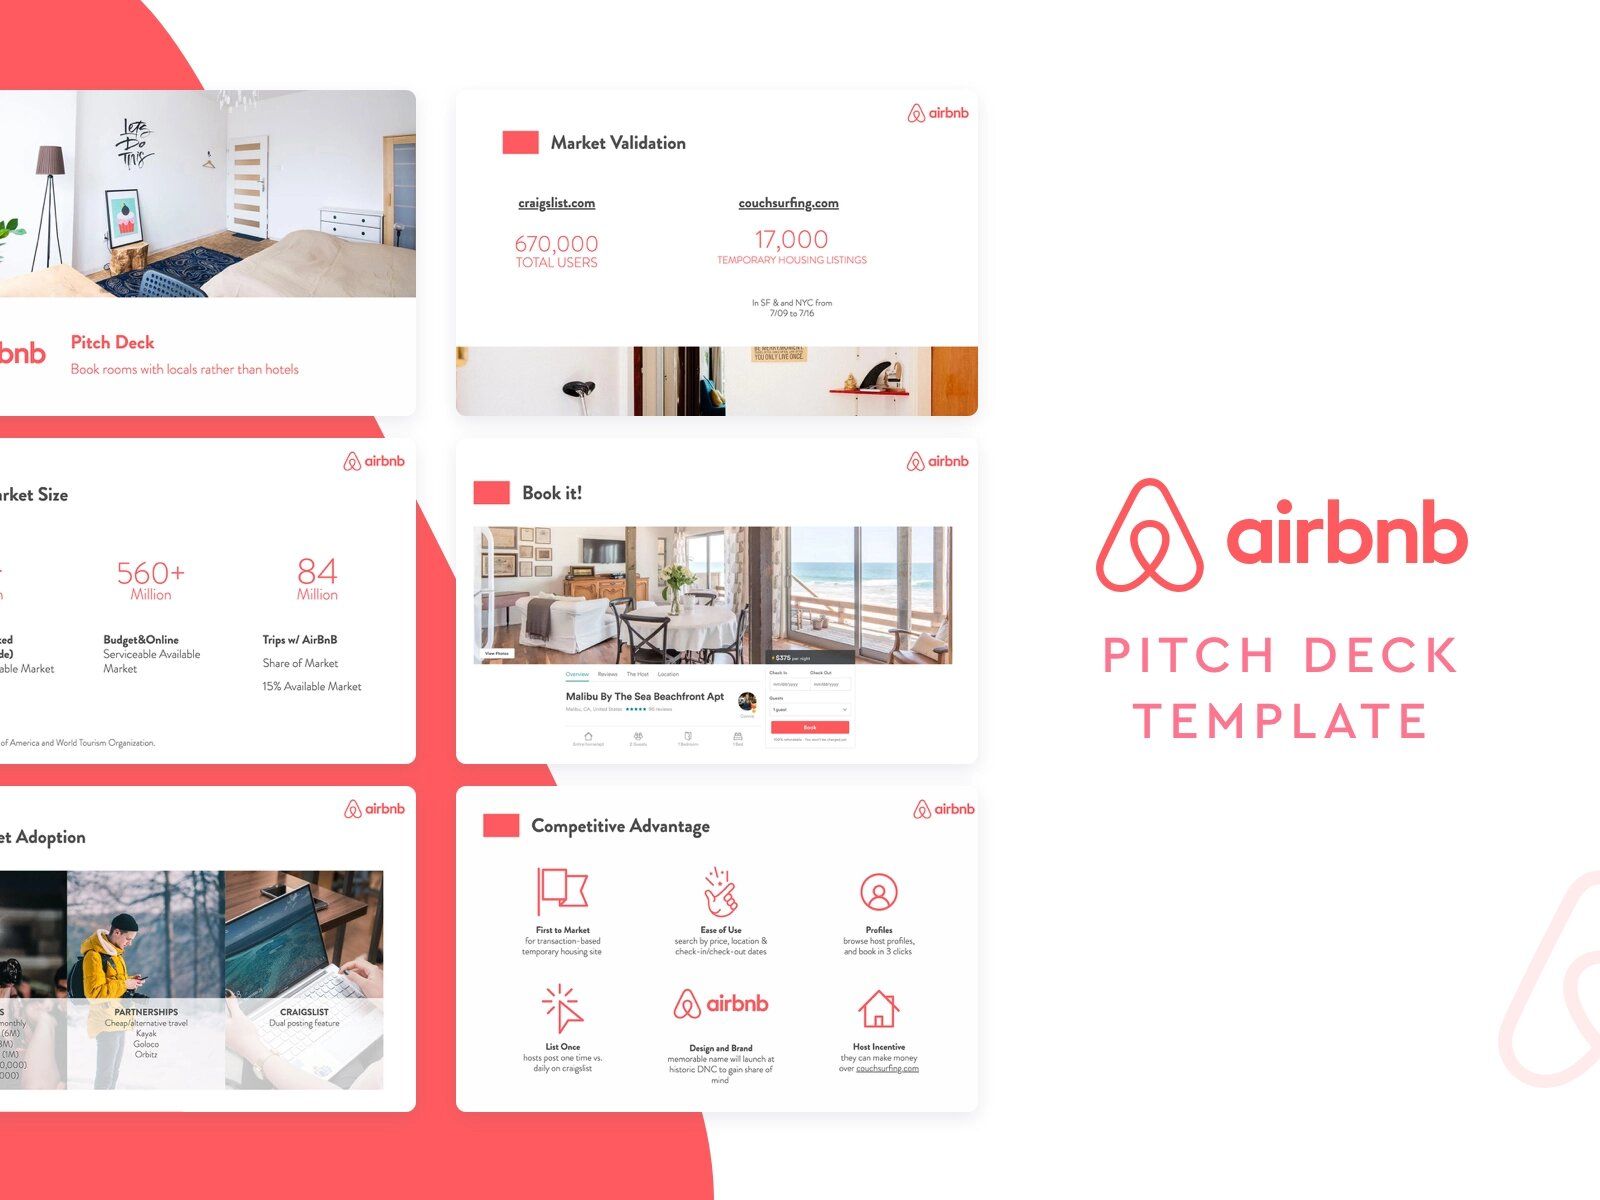 Go talking to investors when you already have something to demonstrate, like Airbnb did (*image by [Slidebean](https://dribbble.com/slidebean){ rel="nofollow" target="_blank" .default-md}*)